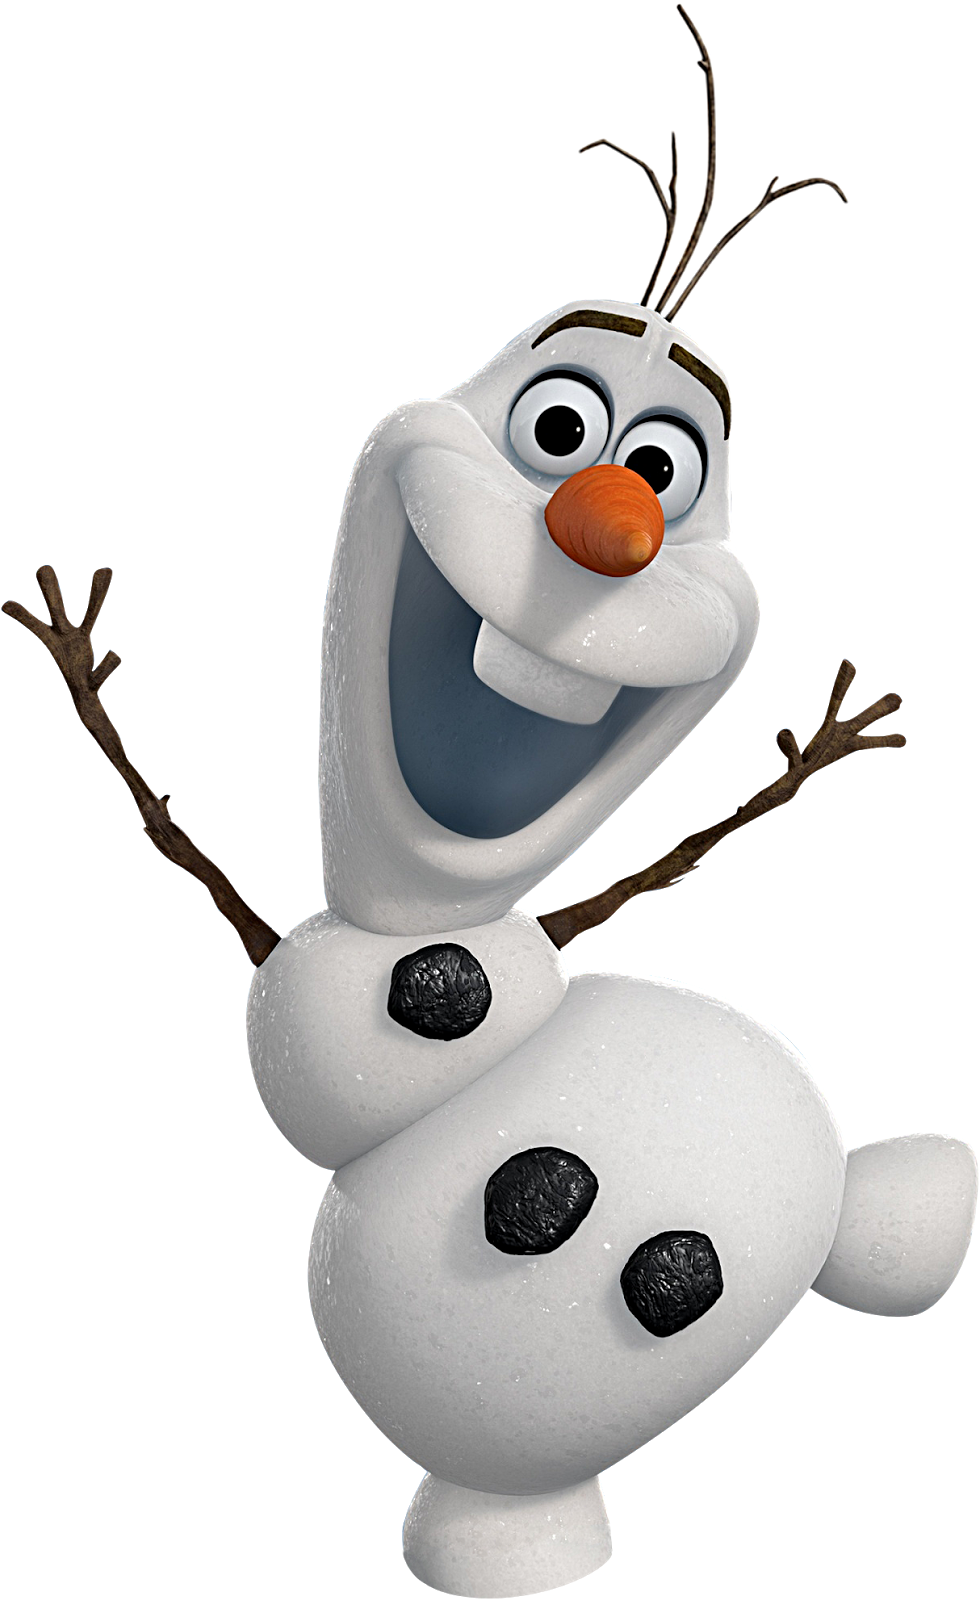 A happy Olaf, the snowman from the animated film Frozen.